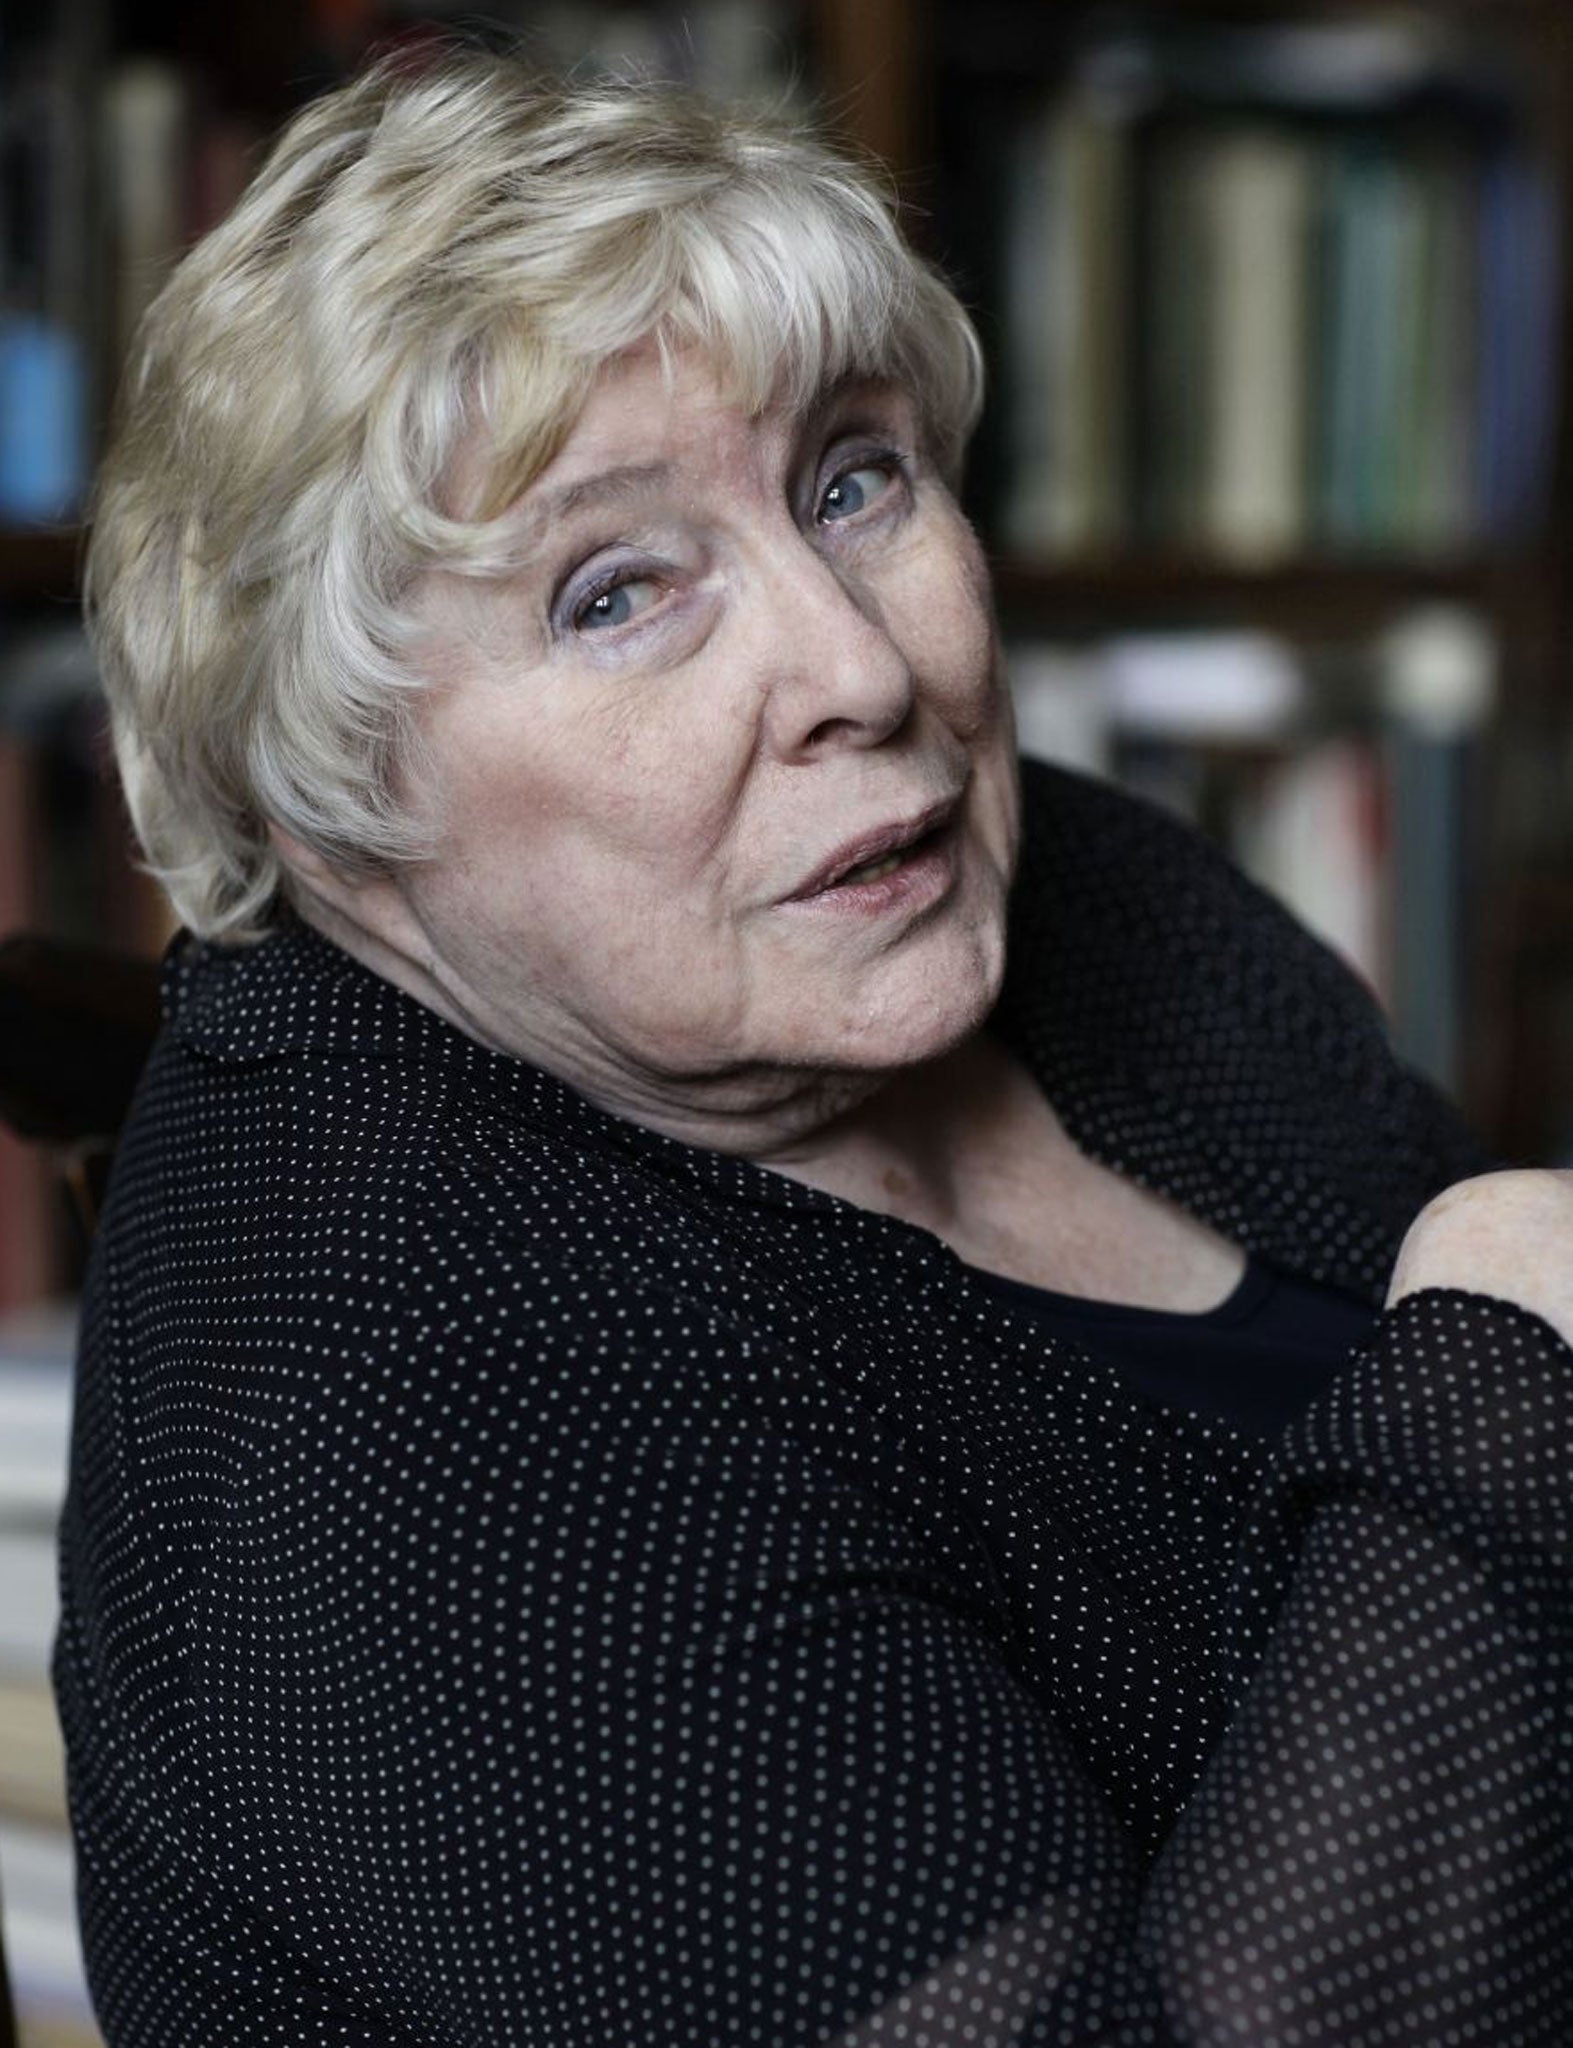 'I've been catching up on Breaking Bad and Orange is the New Black. I'm glued, long into the night': The novelist Fay Weldon